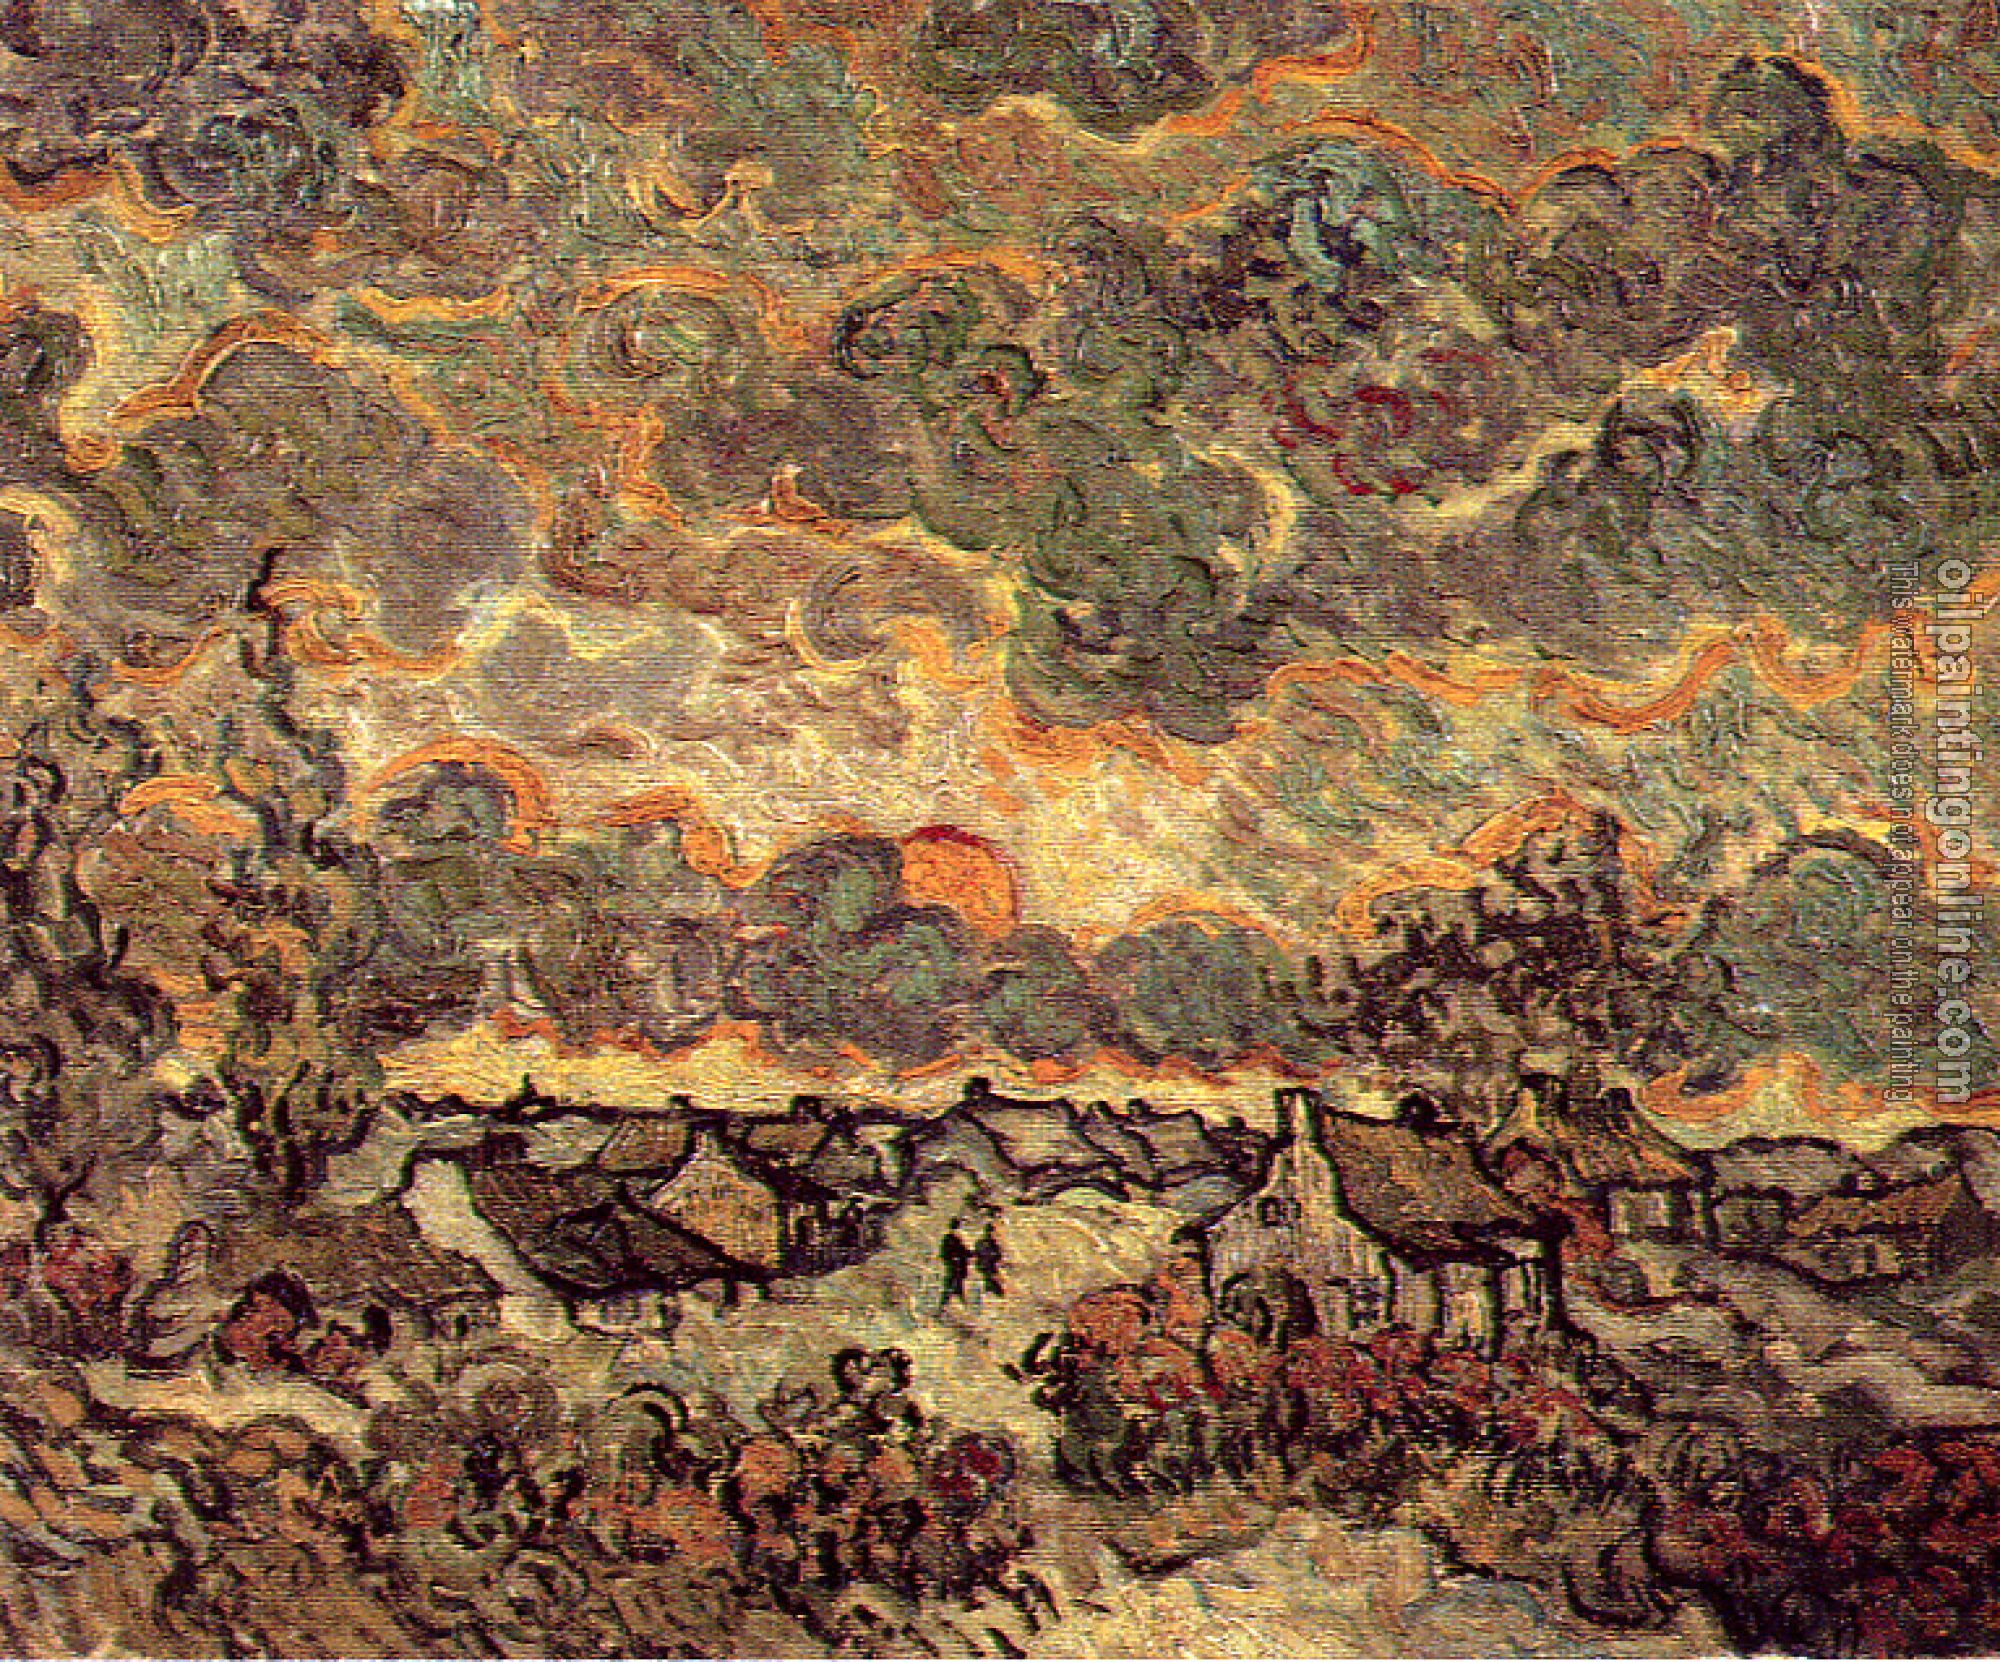 Gogh, Vincent van - Cottages and Cypresses at Sunset with Stormy Sky